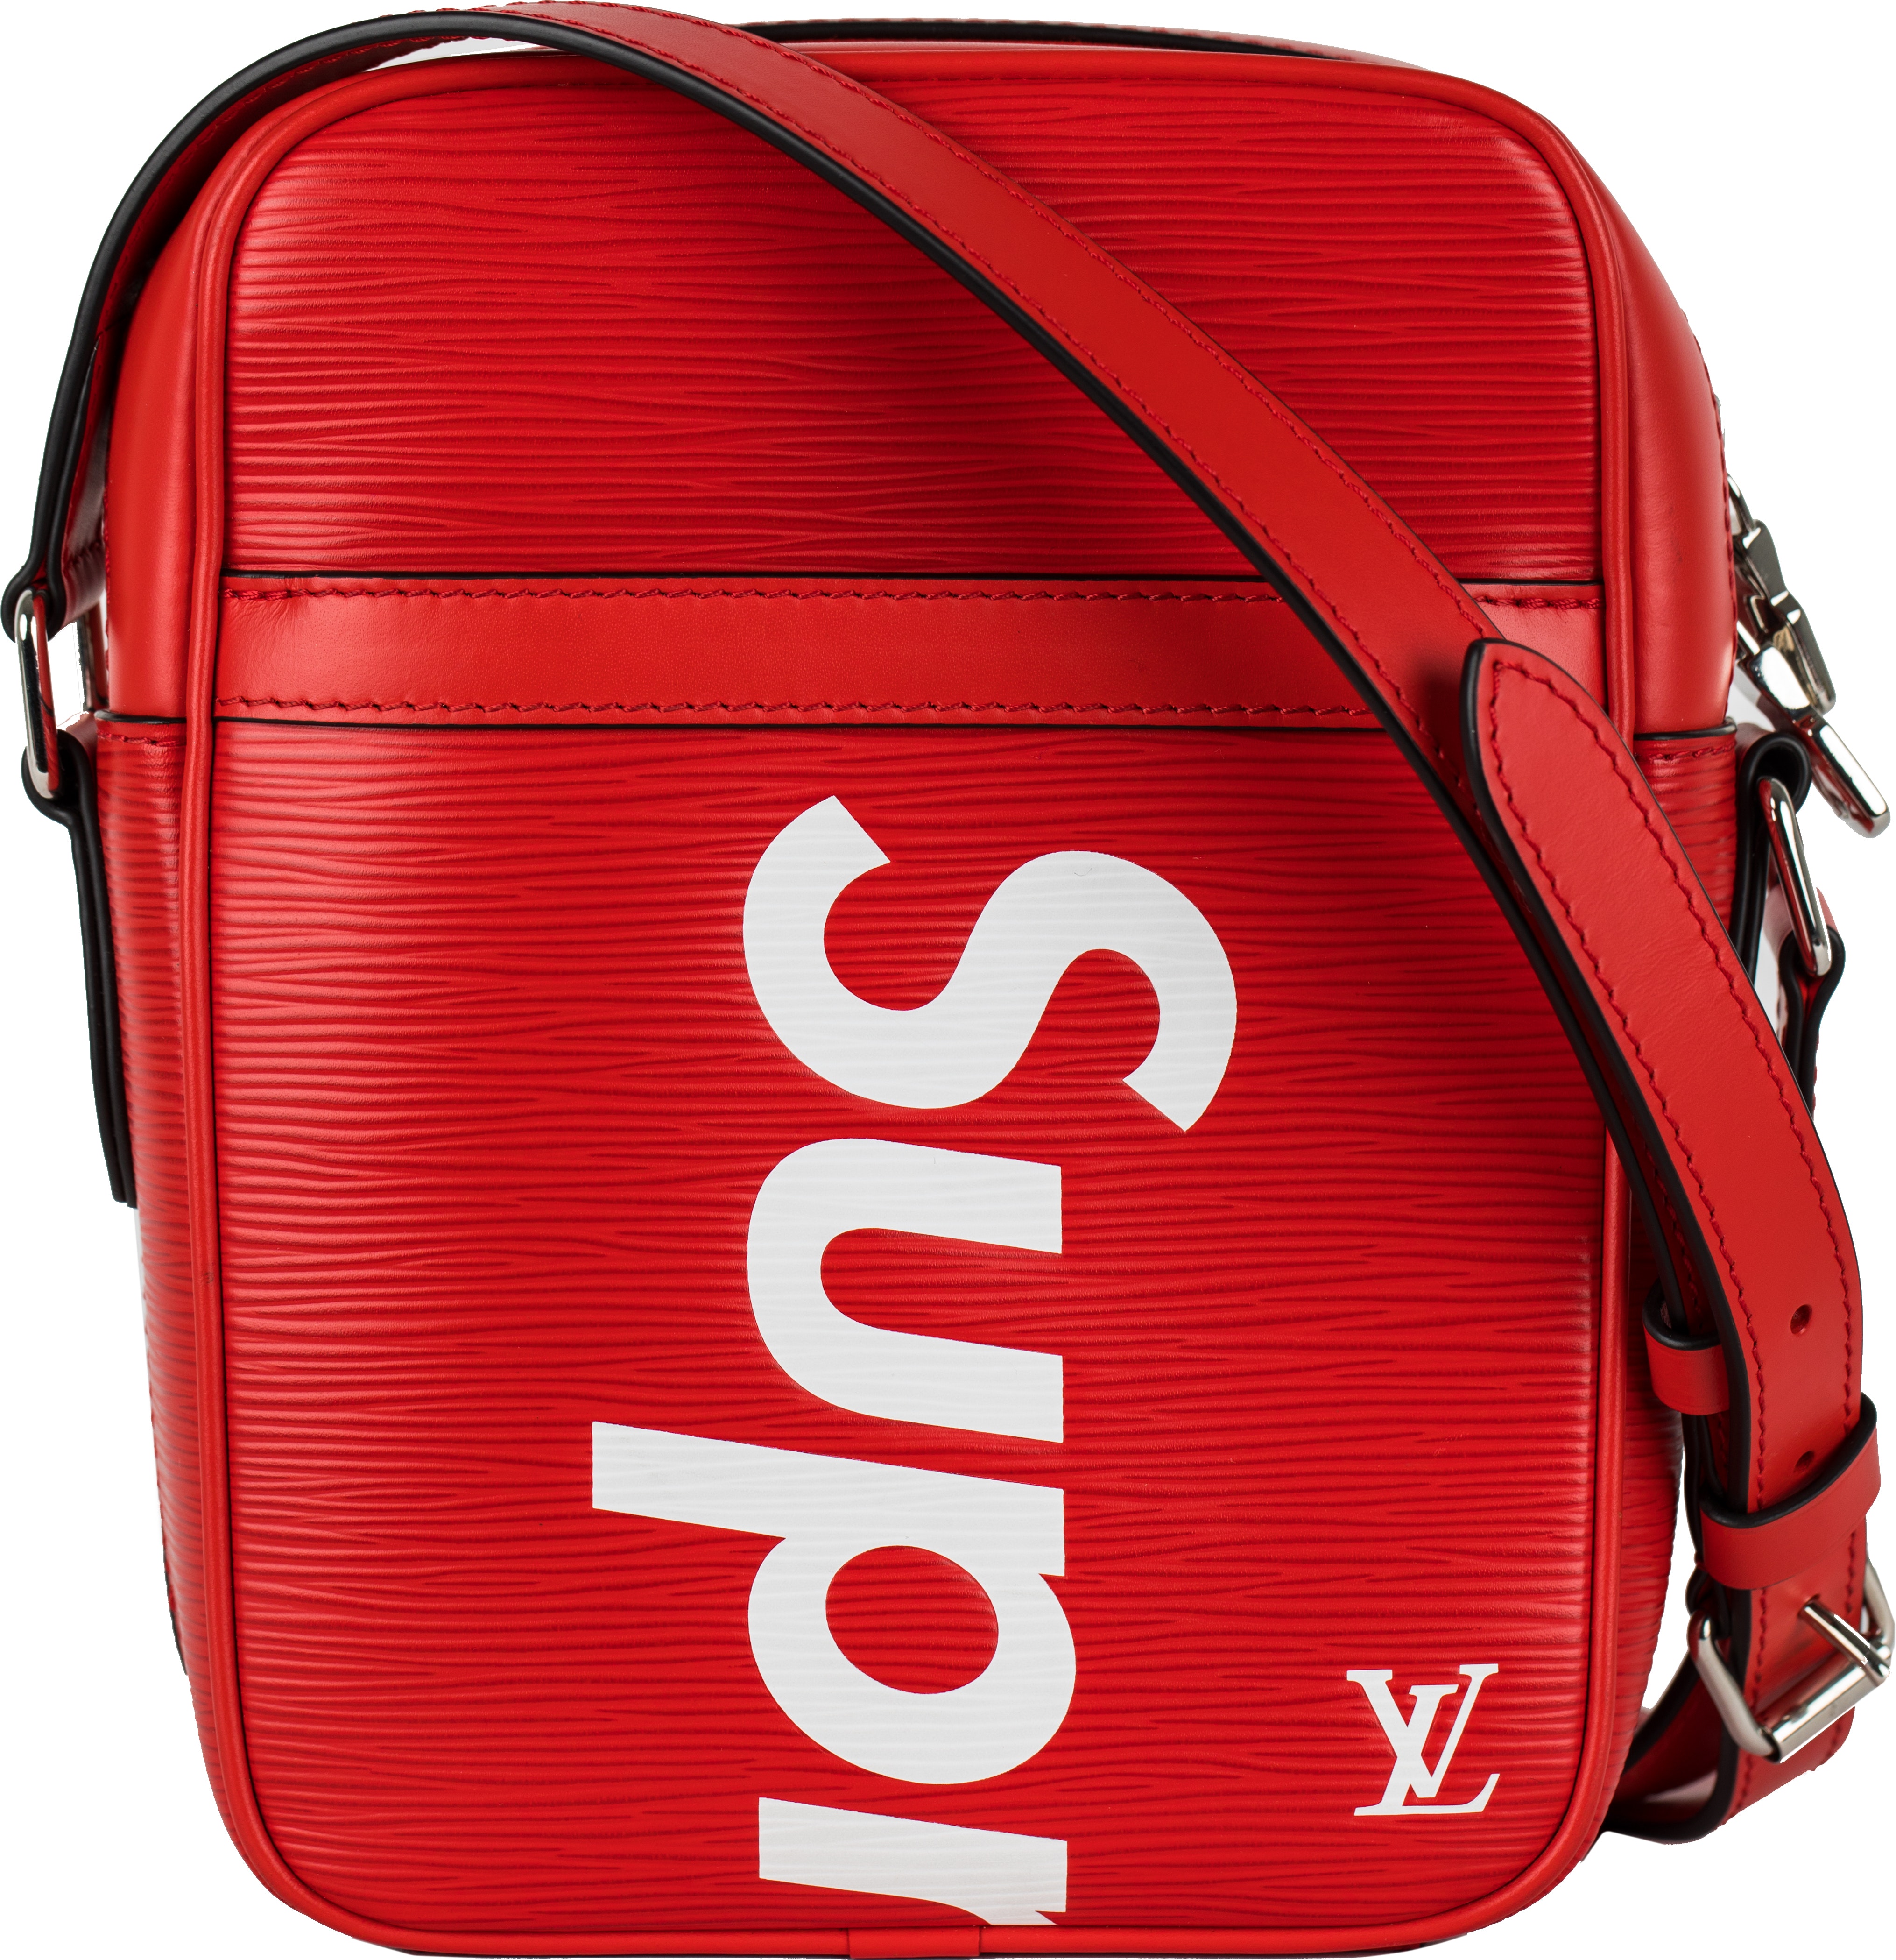 LV LOUIS VUITTON X SUPREME Backpack Red Preowned Nice Save Money Purse   eBay